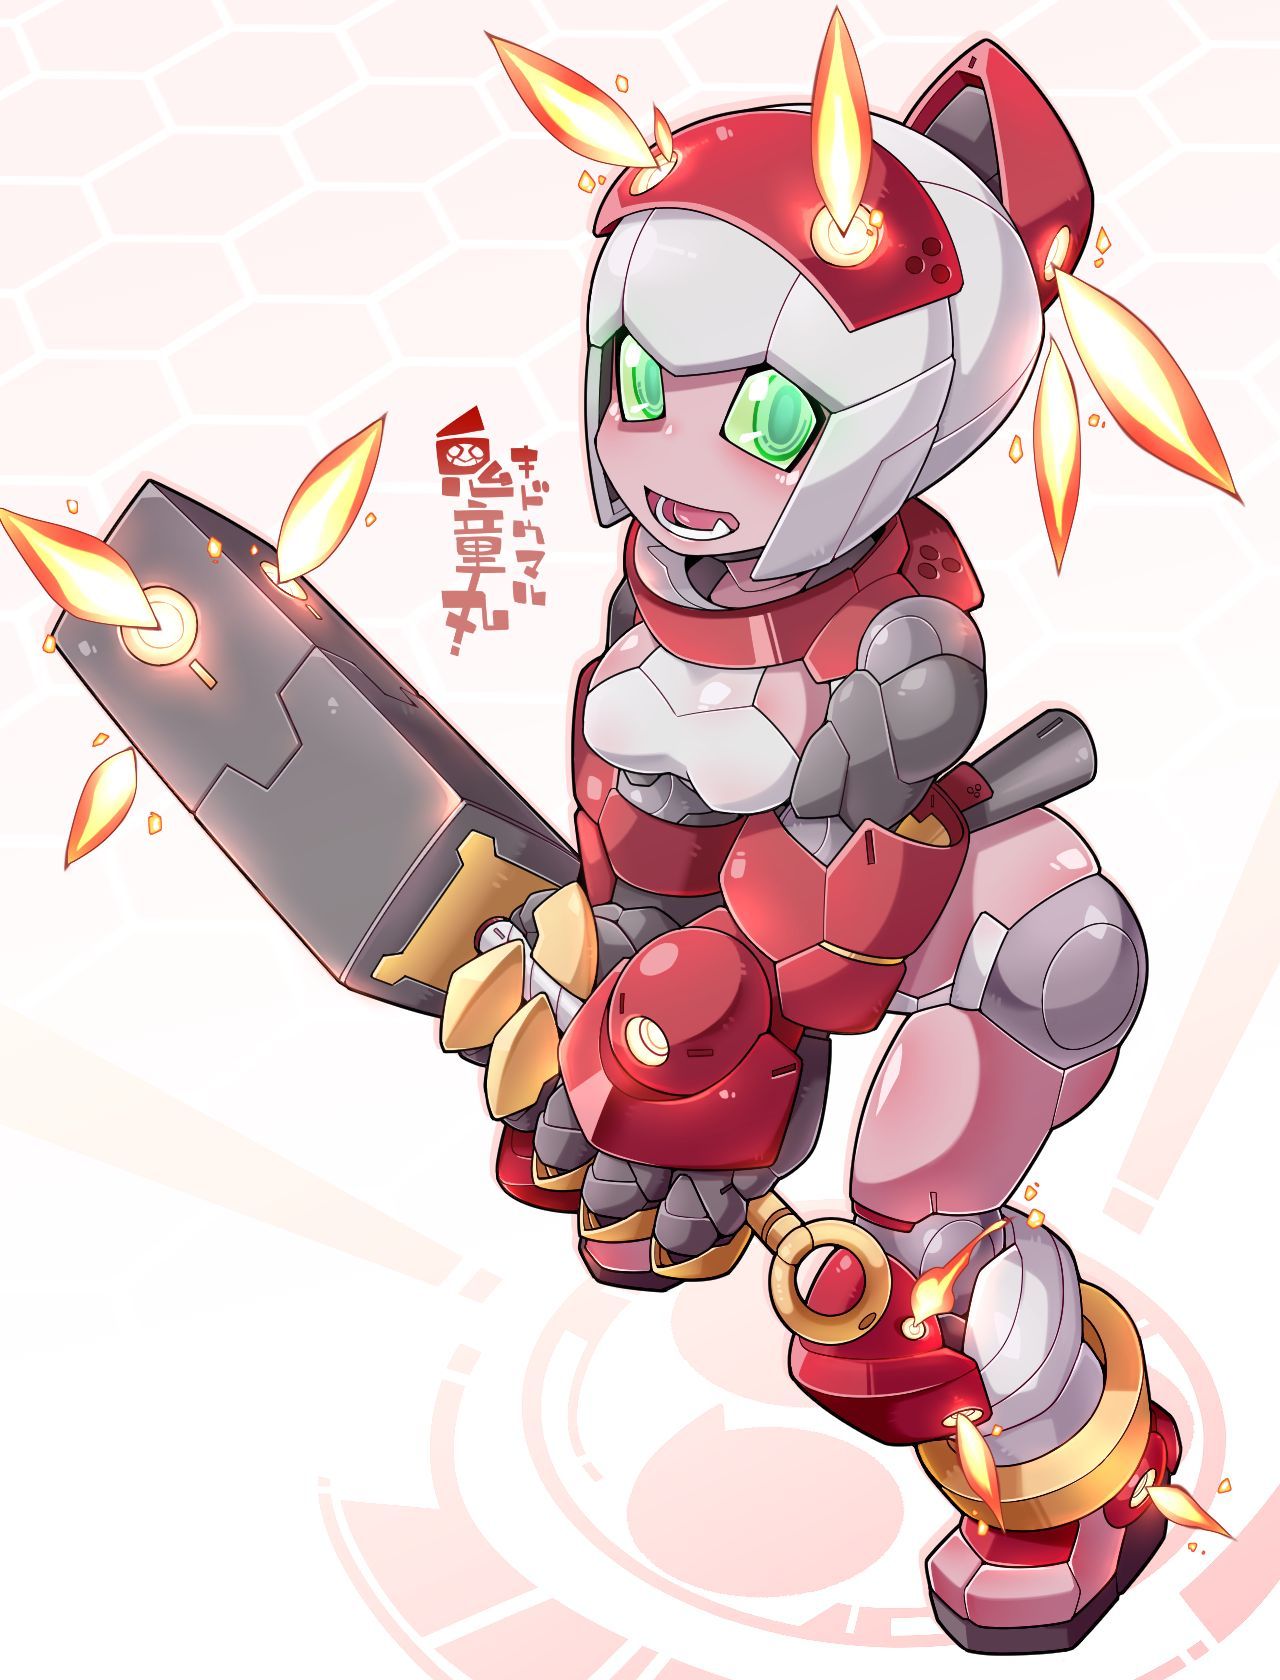 [Pixiv] kni-droid (Kにぃー, weis2626) (Pixiv ID: 1937581) 24